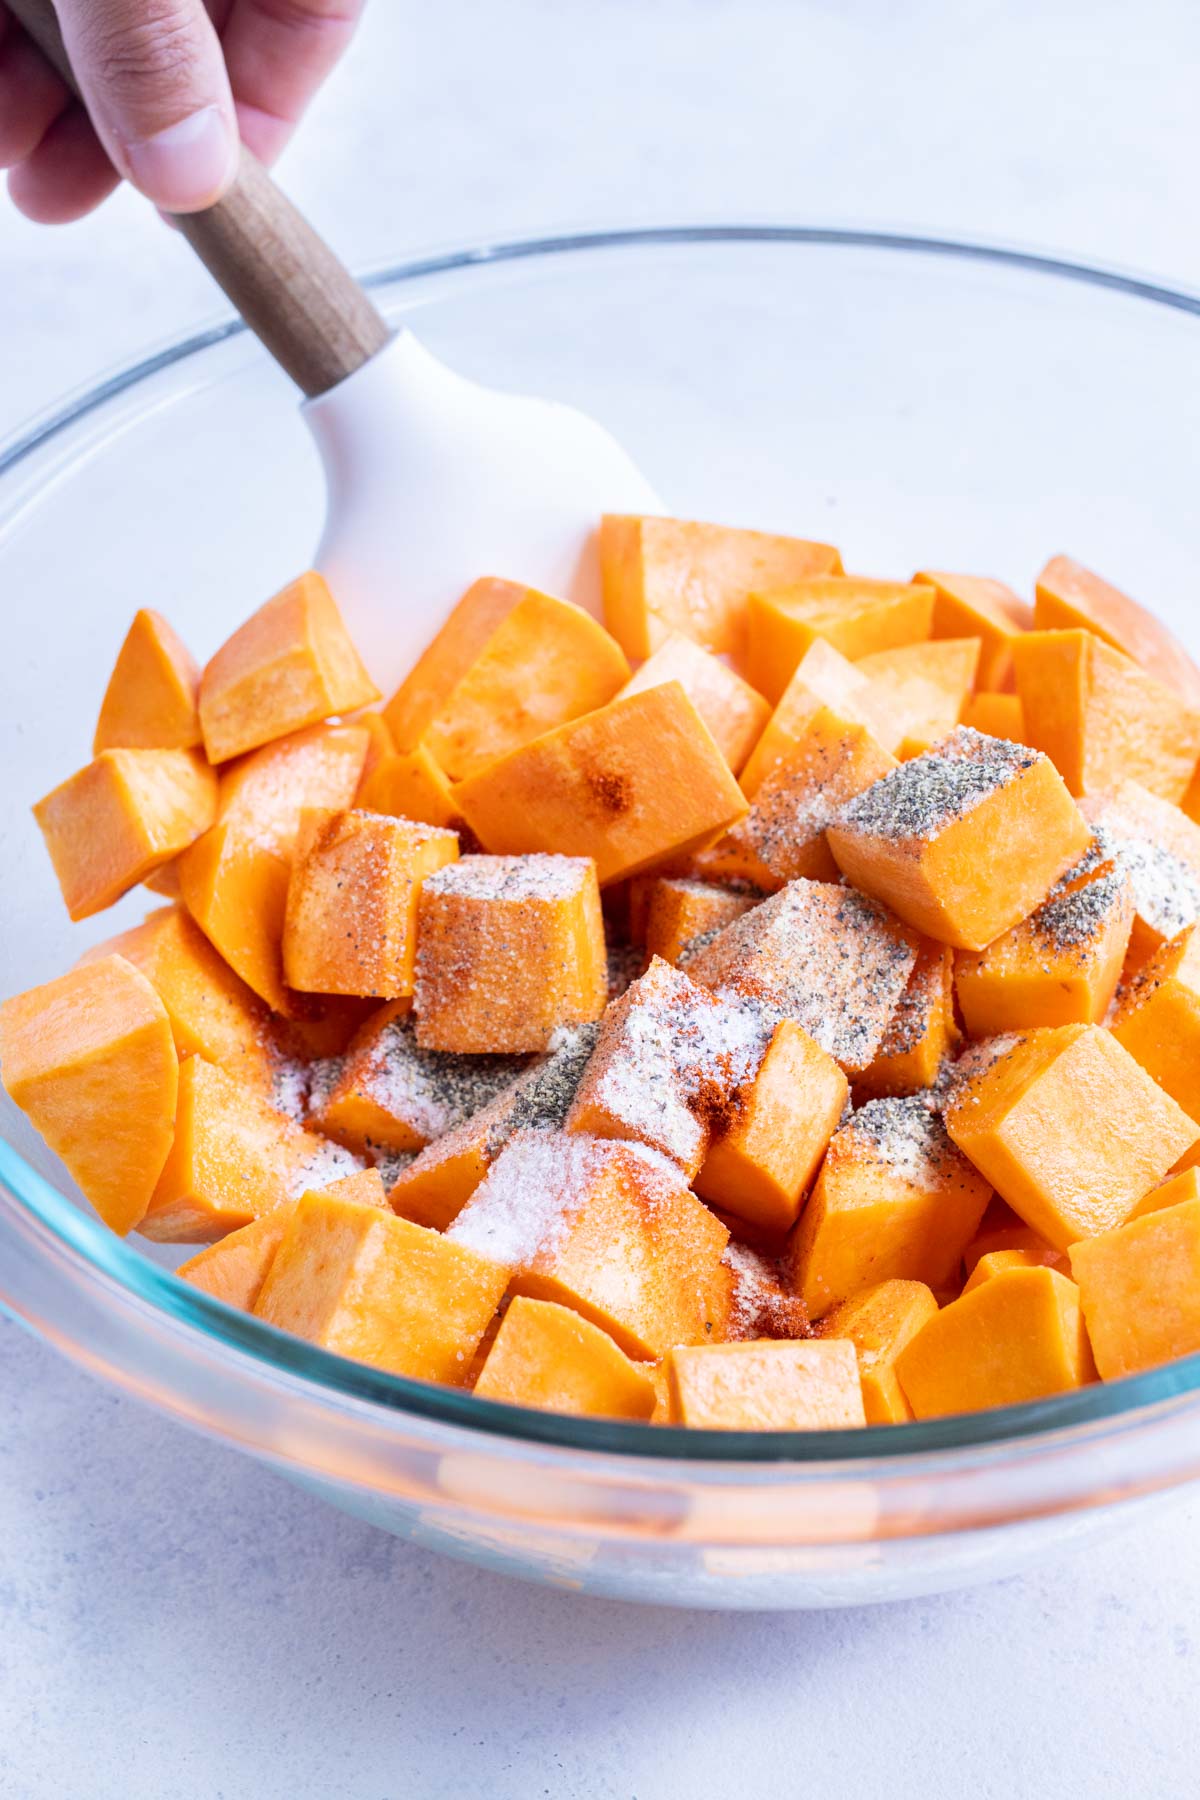 Garlic powder, paprika, salt, and pepper are added to oiled sweet potatoes.